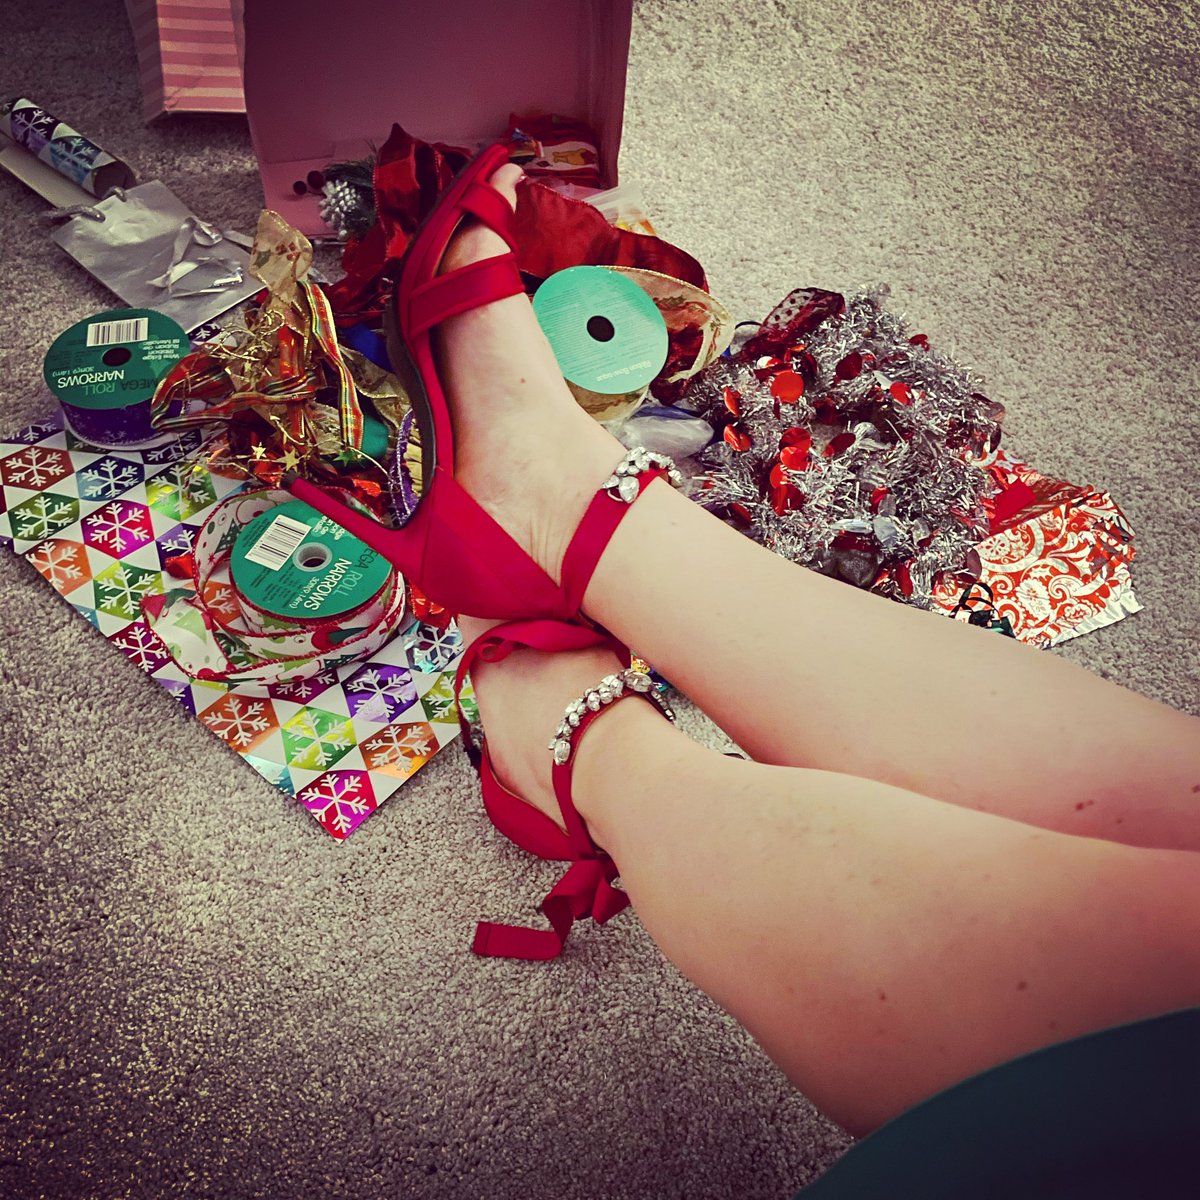 Ribbons, bows, glitter and sparkles wrapping gifts in these red wrap heels and green pencil skirt. #tistheseason #feelingfestive #wrappinggifts 🎄👠💚🎅 #redheels #shoelove365 #shoes #shoelove #sholover #heellove #heellover #highheels #heels #heelsofcourse #shoeaddict